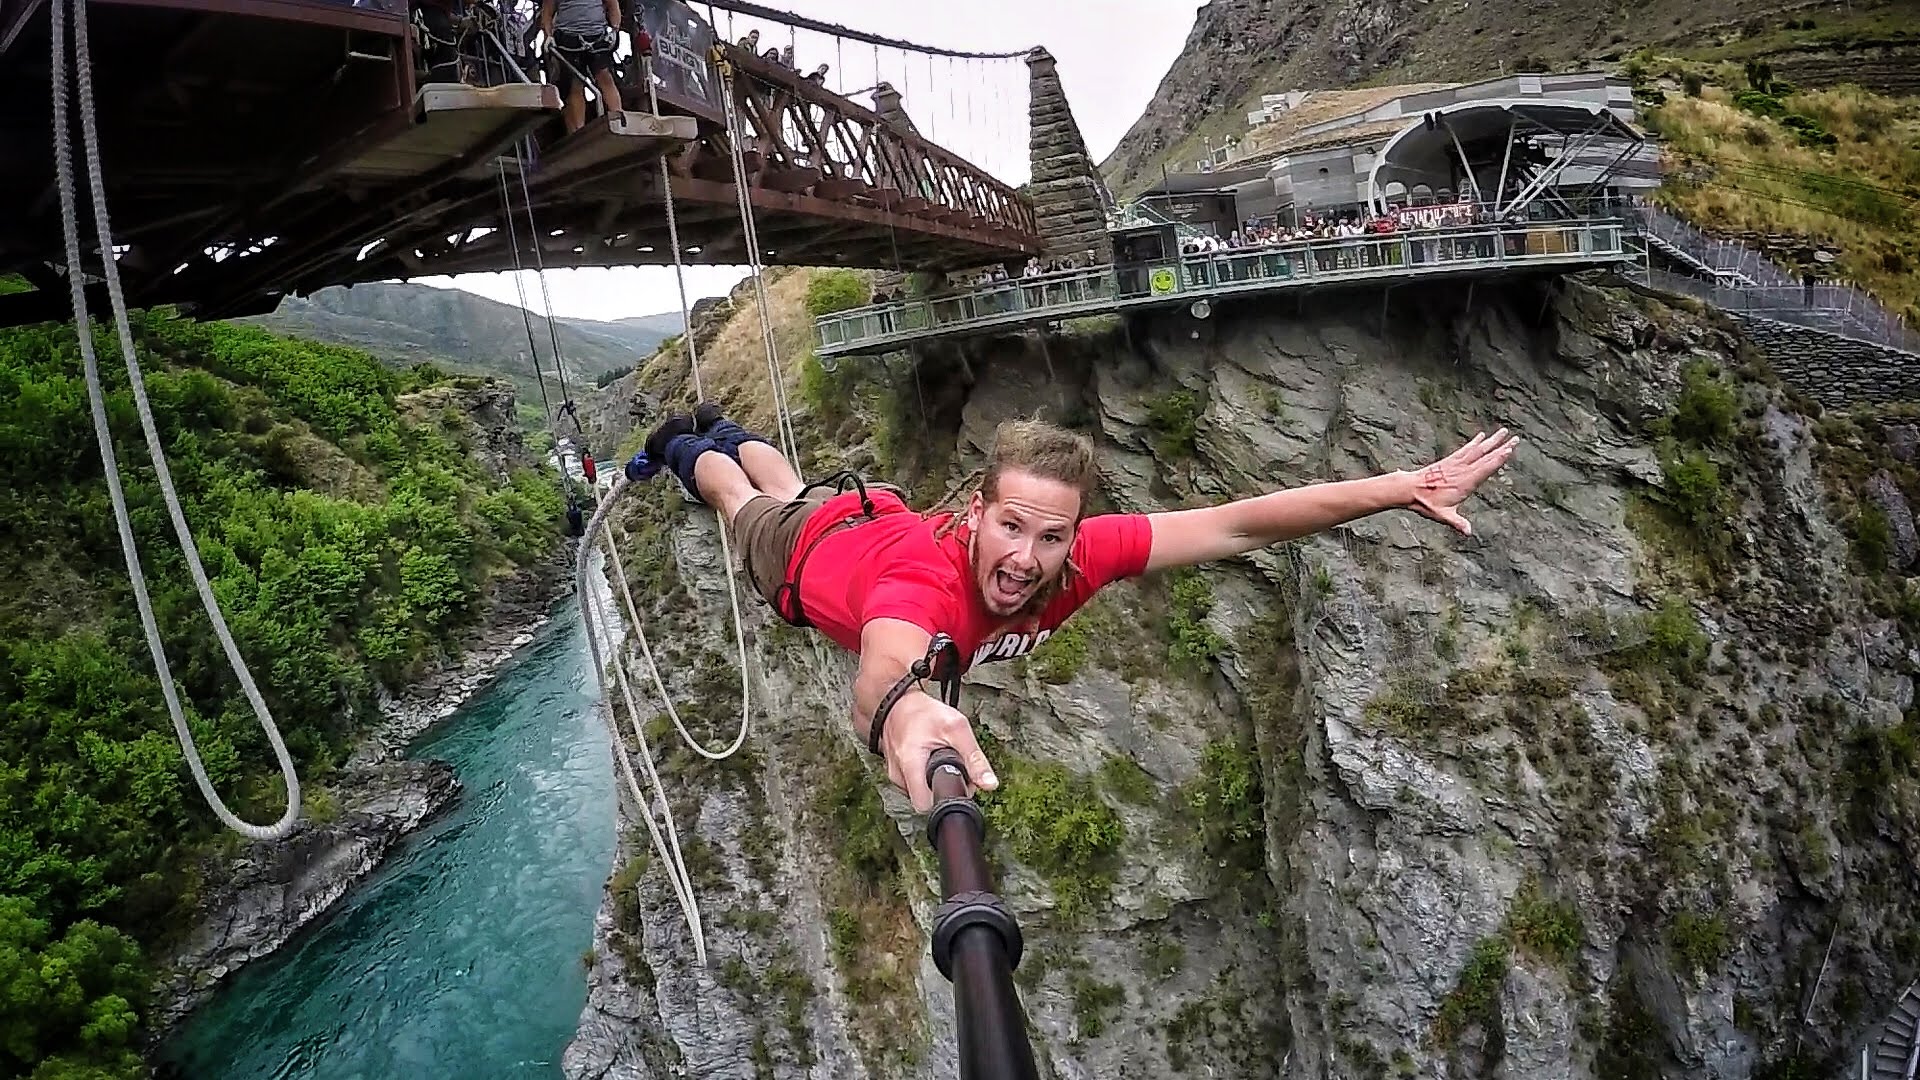 Bungee Jump Images. 